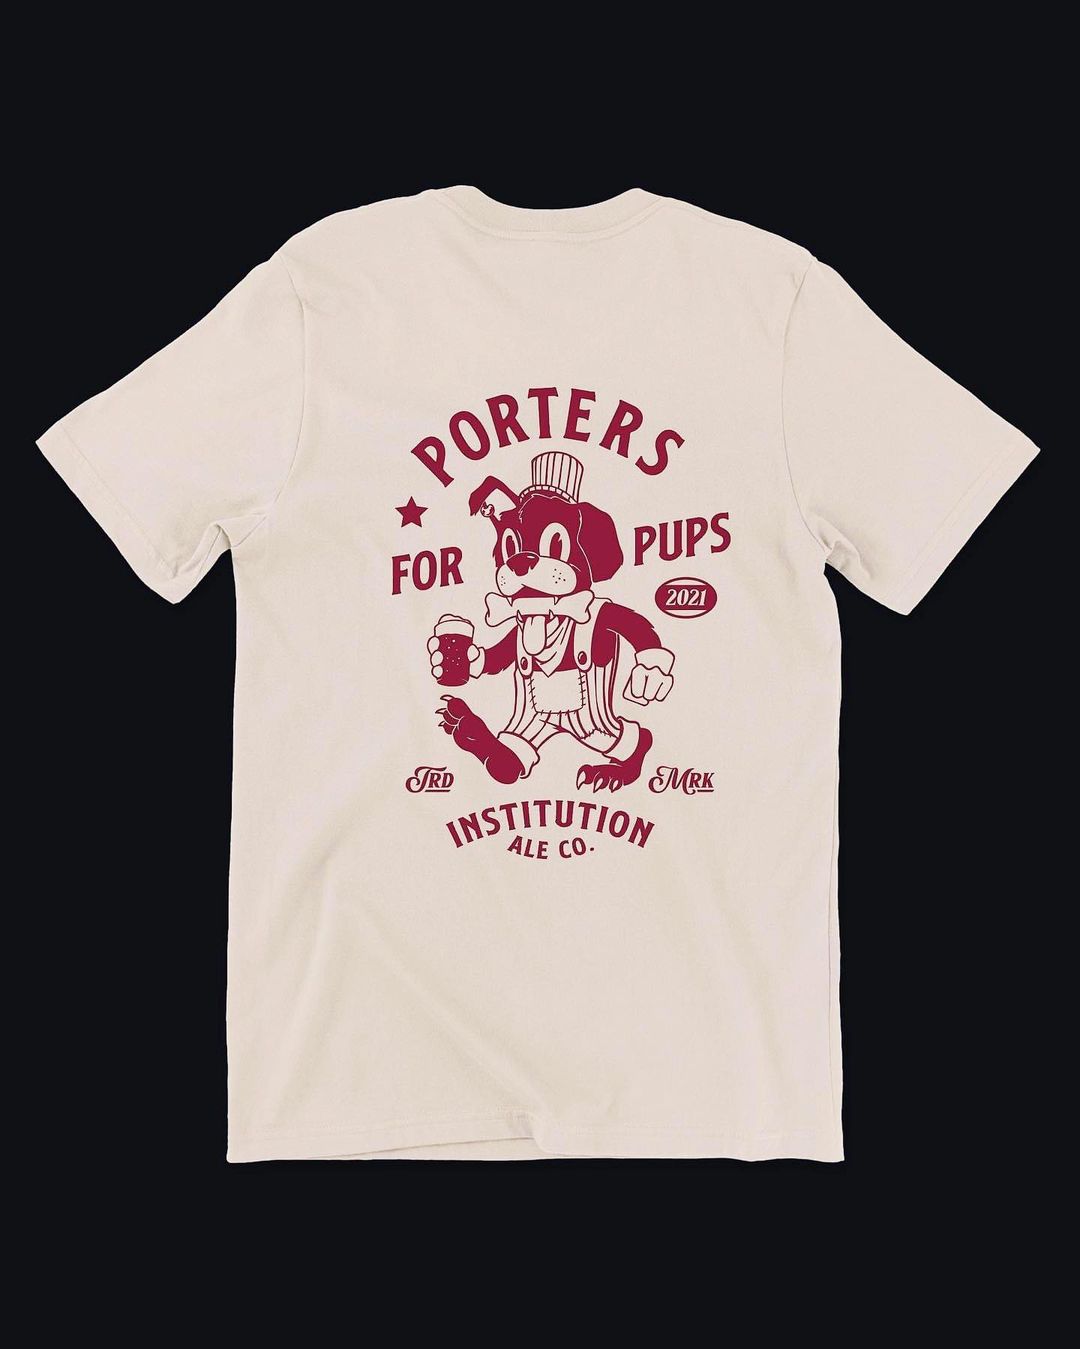 All November long, our friends over at @institutionales @institutionales_sb will be raising funds for our local animal shelters with their annual Porters For Pups🐶fundraiser!
​
​Participating is easy; purchase a Porters For Pups shirt, glass, or their Rye Porter, Ratched!
​
​They will be donating a portion of proceeds to our friends at  @vcanimalservices & Santa Barbara County Animal Services. Stop by either one of their locations in November to snag the limited edition merch. Thank you all for your support❣️. <a target='_blank' href='https://www.instagram.com/explore/tags/PortersForPups2021/'>#PortersForPups2021</a> <a target='_blank' href='https://www.instagram.com/explore/tags/VCAS/'>#VCAS</a> <a target='_blank' href='https://www.instagram.com/explore/tags/SBCAS/'>#SBCAS</a> <a target='_blank' href='https://www.instagram.com/explore/tags/partnerships/'>#partnerships</a> <a target='_blank' href='https://www.instagram.com/explore/tags/institutionalecompany/'>#institutionalecompany</a>